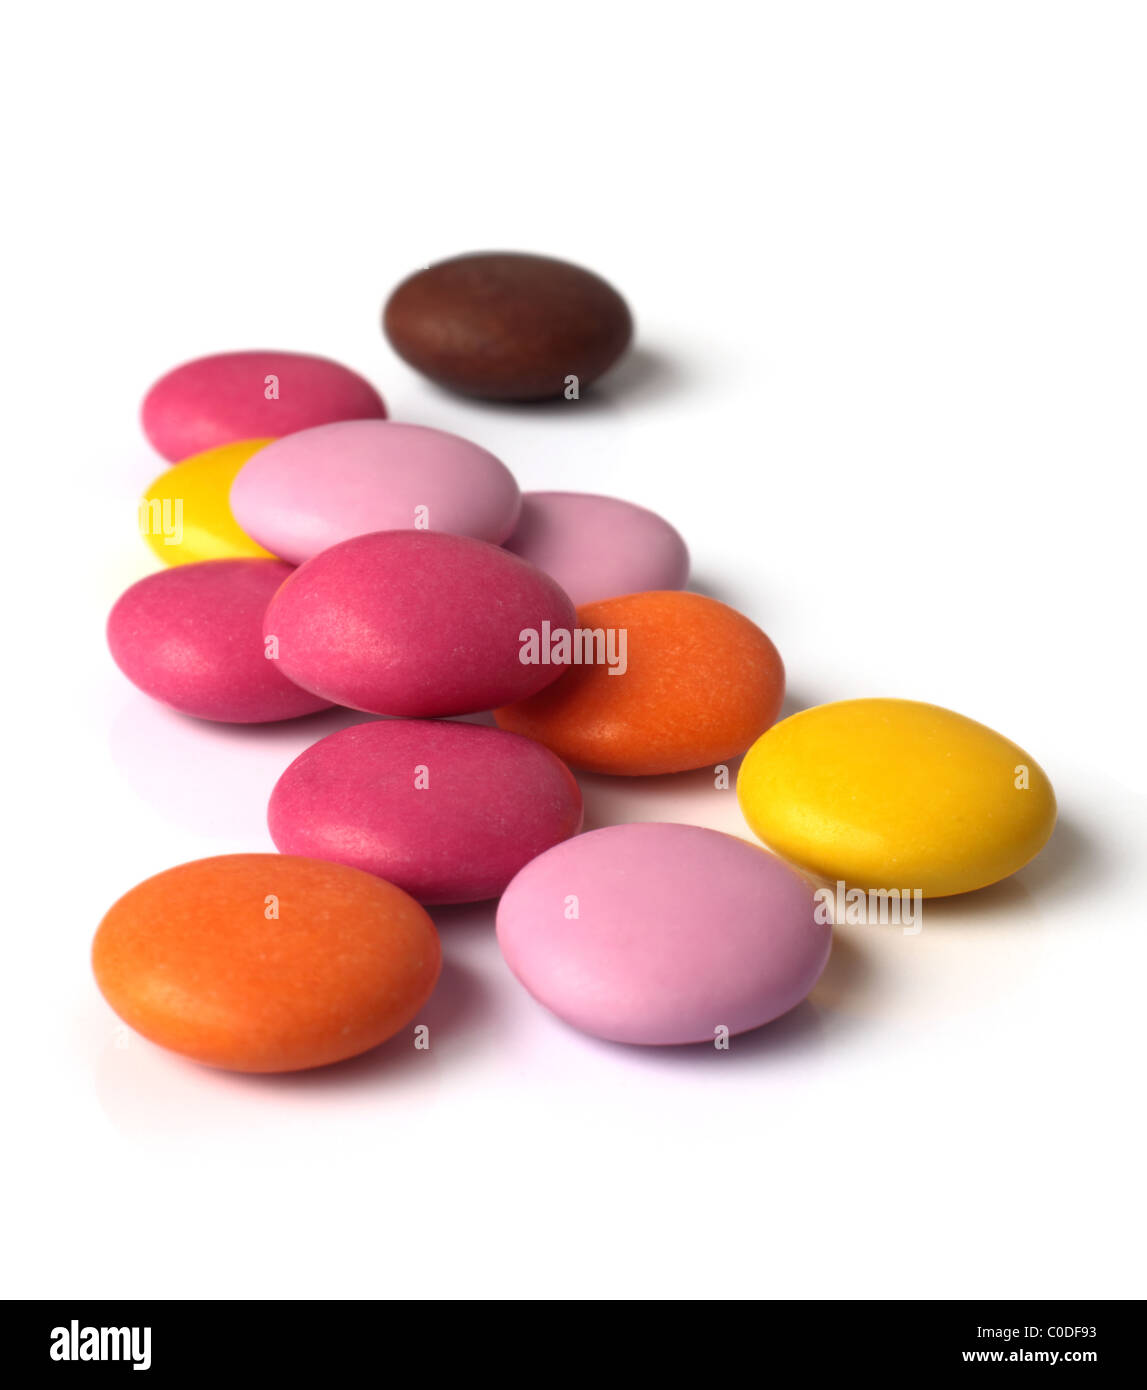 Colorful candy-coated chocolates close up. Stock Photo